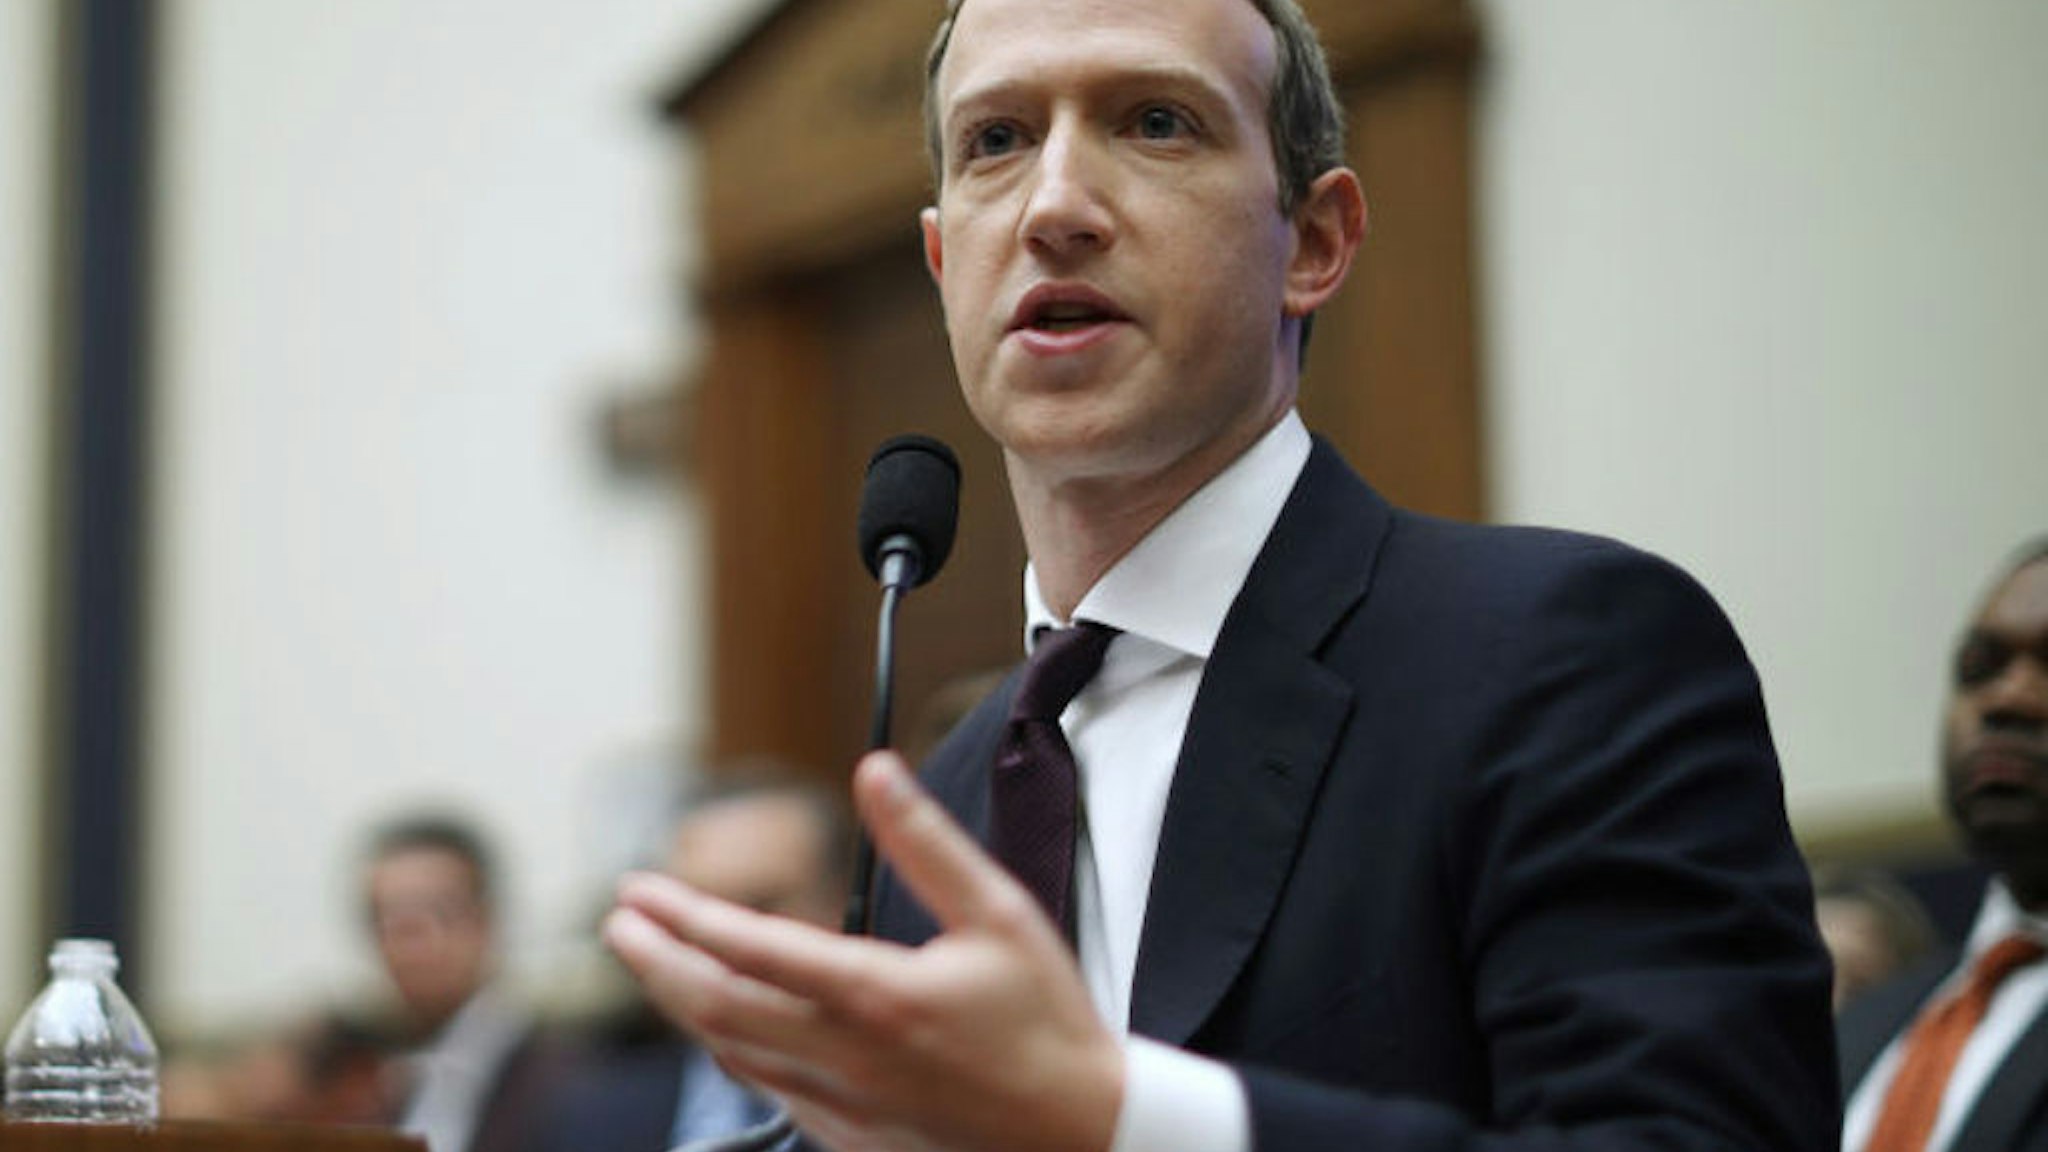 WASHINGTON, DC - OCTOBER 23: Facebook co-founder and CEO Mark Zuckerberg testifies before the House Financial Services Committee in the Rayburn House Office Building on Capitol Hill October 23, 2019 in Washington, DC. Zuckerberg testified about Facebook's proposed cryptocurrency Libra, how his company will handle false and misleading information by political leaders during the 2020 campaign and how it handles its users‚Äô data and privacy.